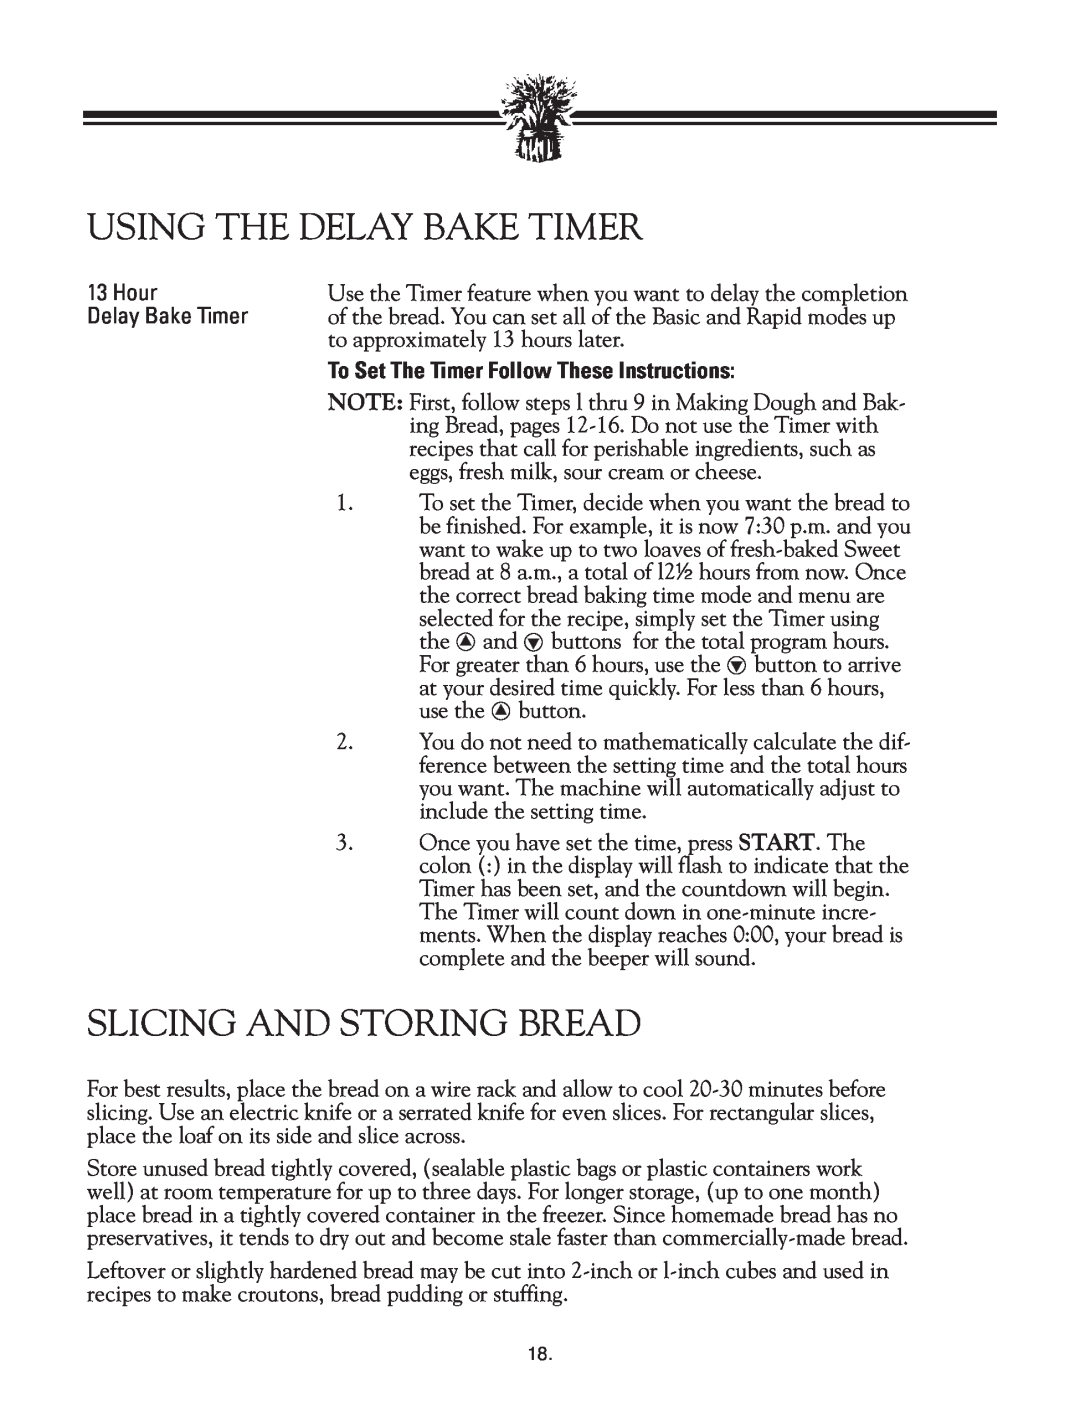 Breadman TR2828G Using The Delay Bake Timer, Slicing And Storing Bread, To Set The Timer Follow These Instructions 